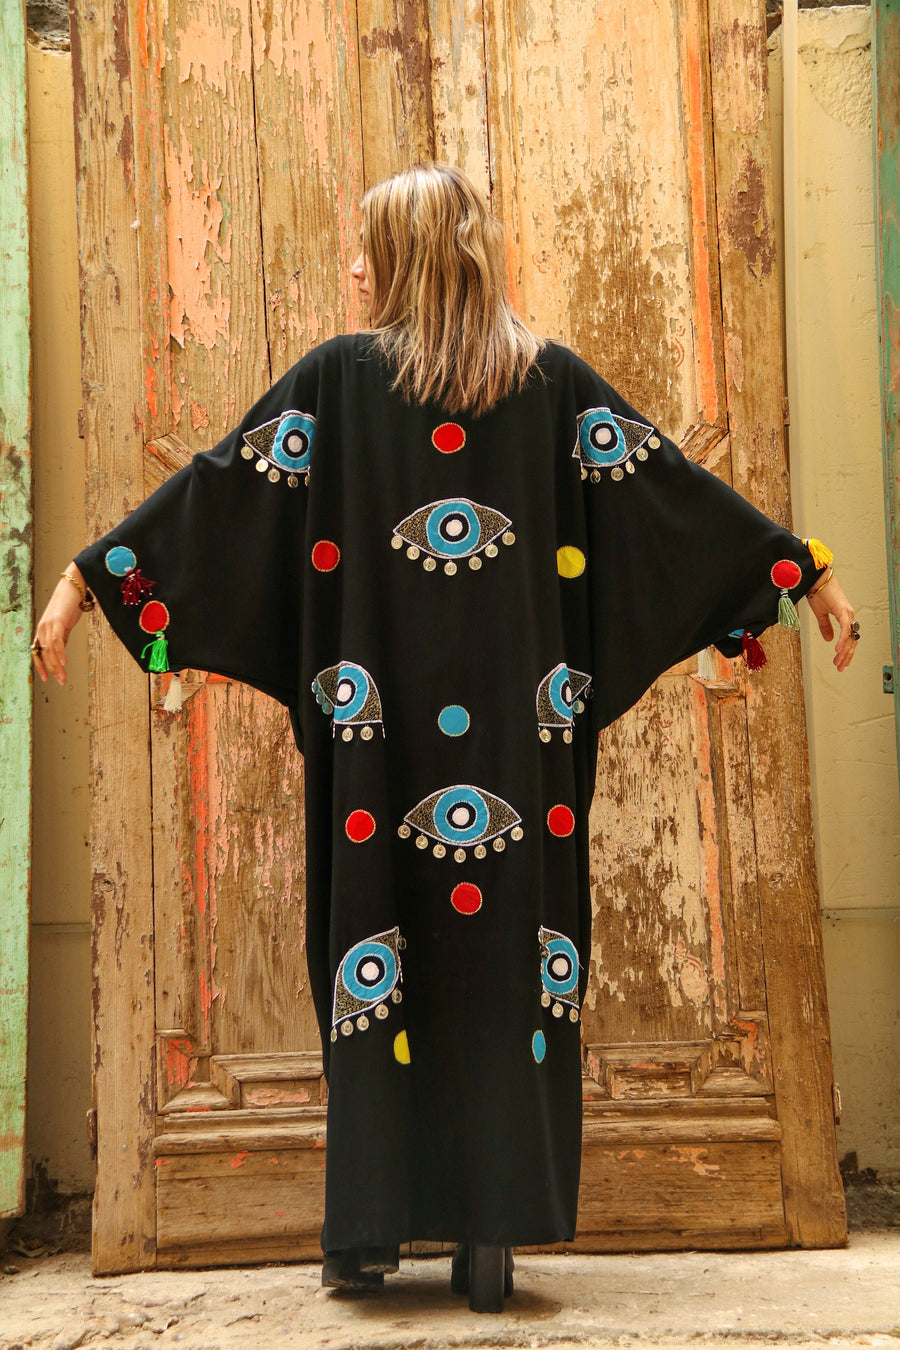 Evil eye Embroidered cardigan with tassels, Boho black Kimono Cardigan, Womens Cardigans, Boho Cardigan, Duster, Black Cardigan, Kimonos